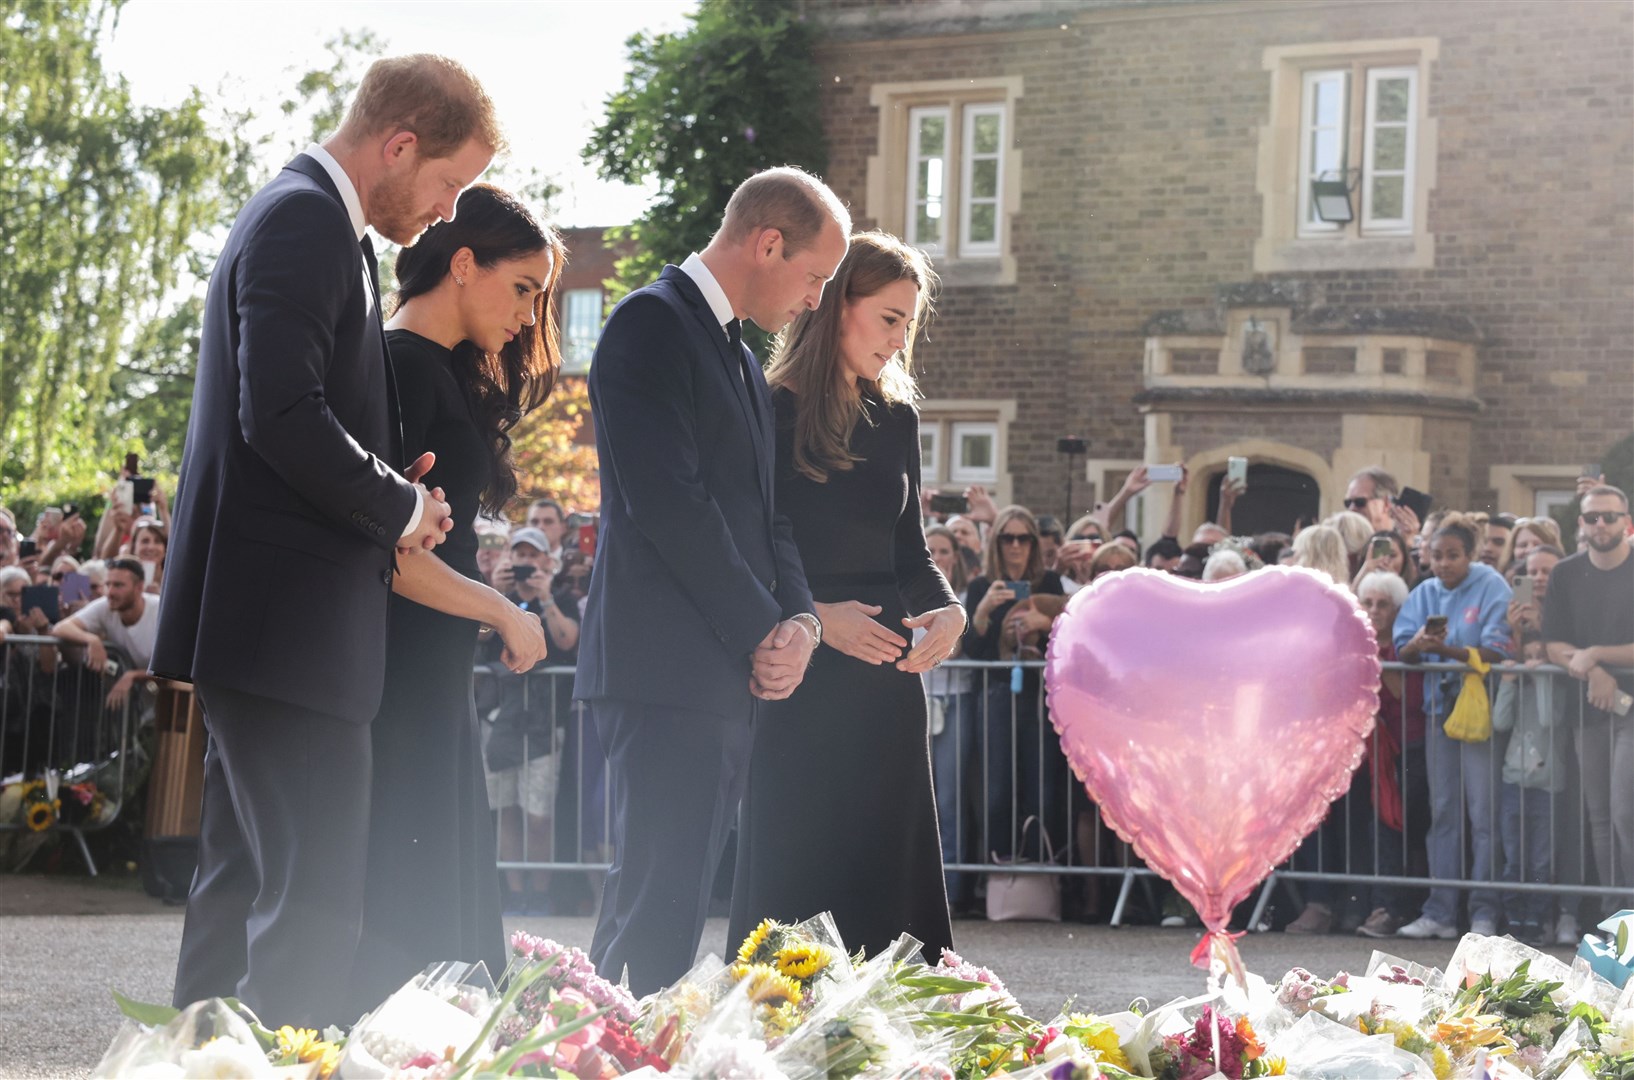 The Prince and Princess of Wales and the Duke and Duchess of Sussex viewing the messages and floral tributes (Chris Jackson/PA)